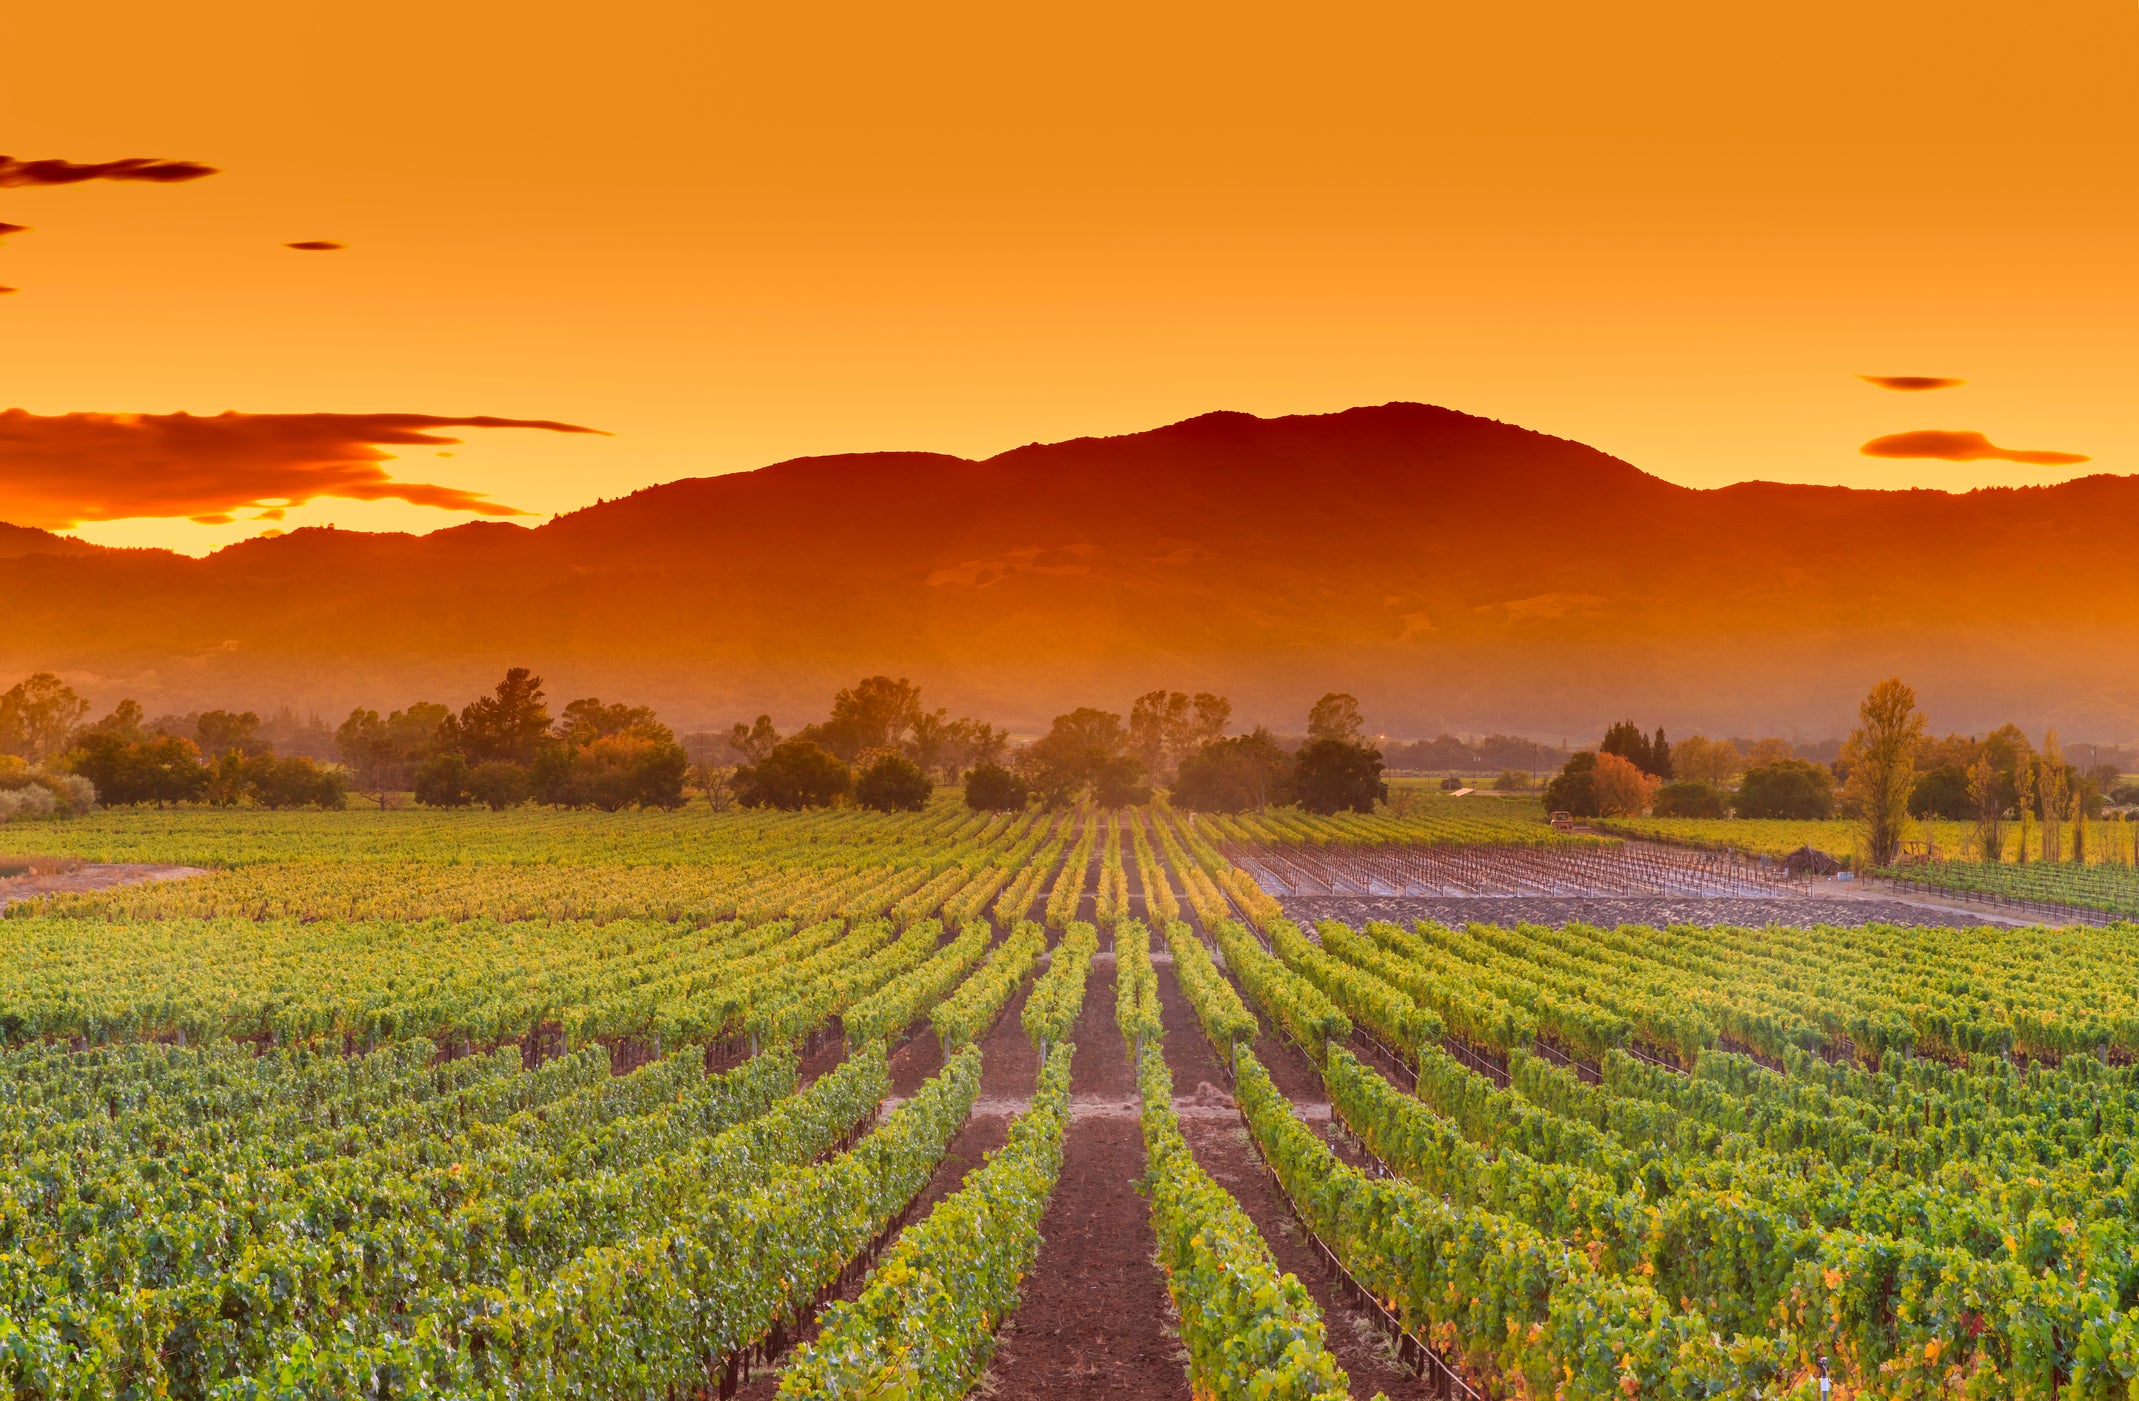 Napa Valley in Northern California is one of the world’s most premium wine destinations